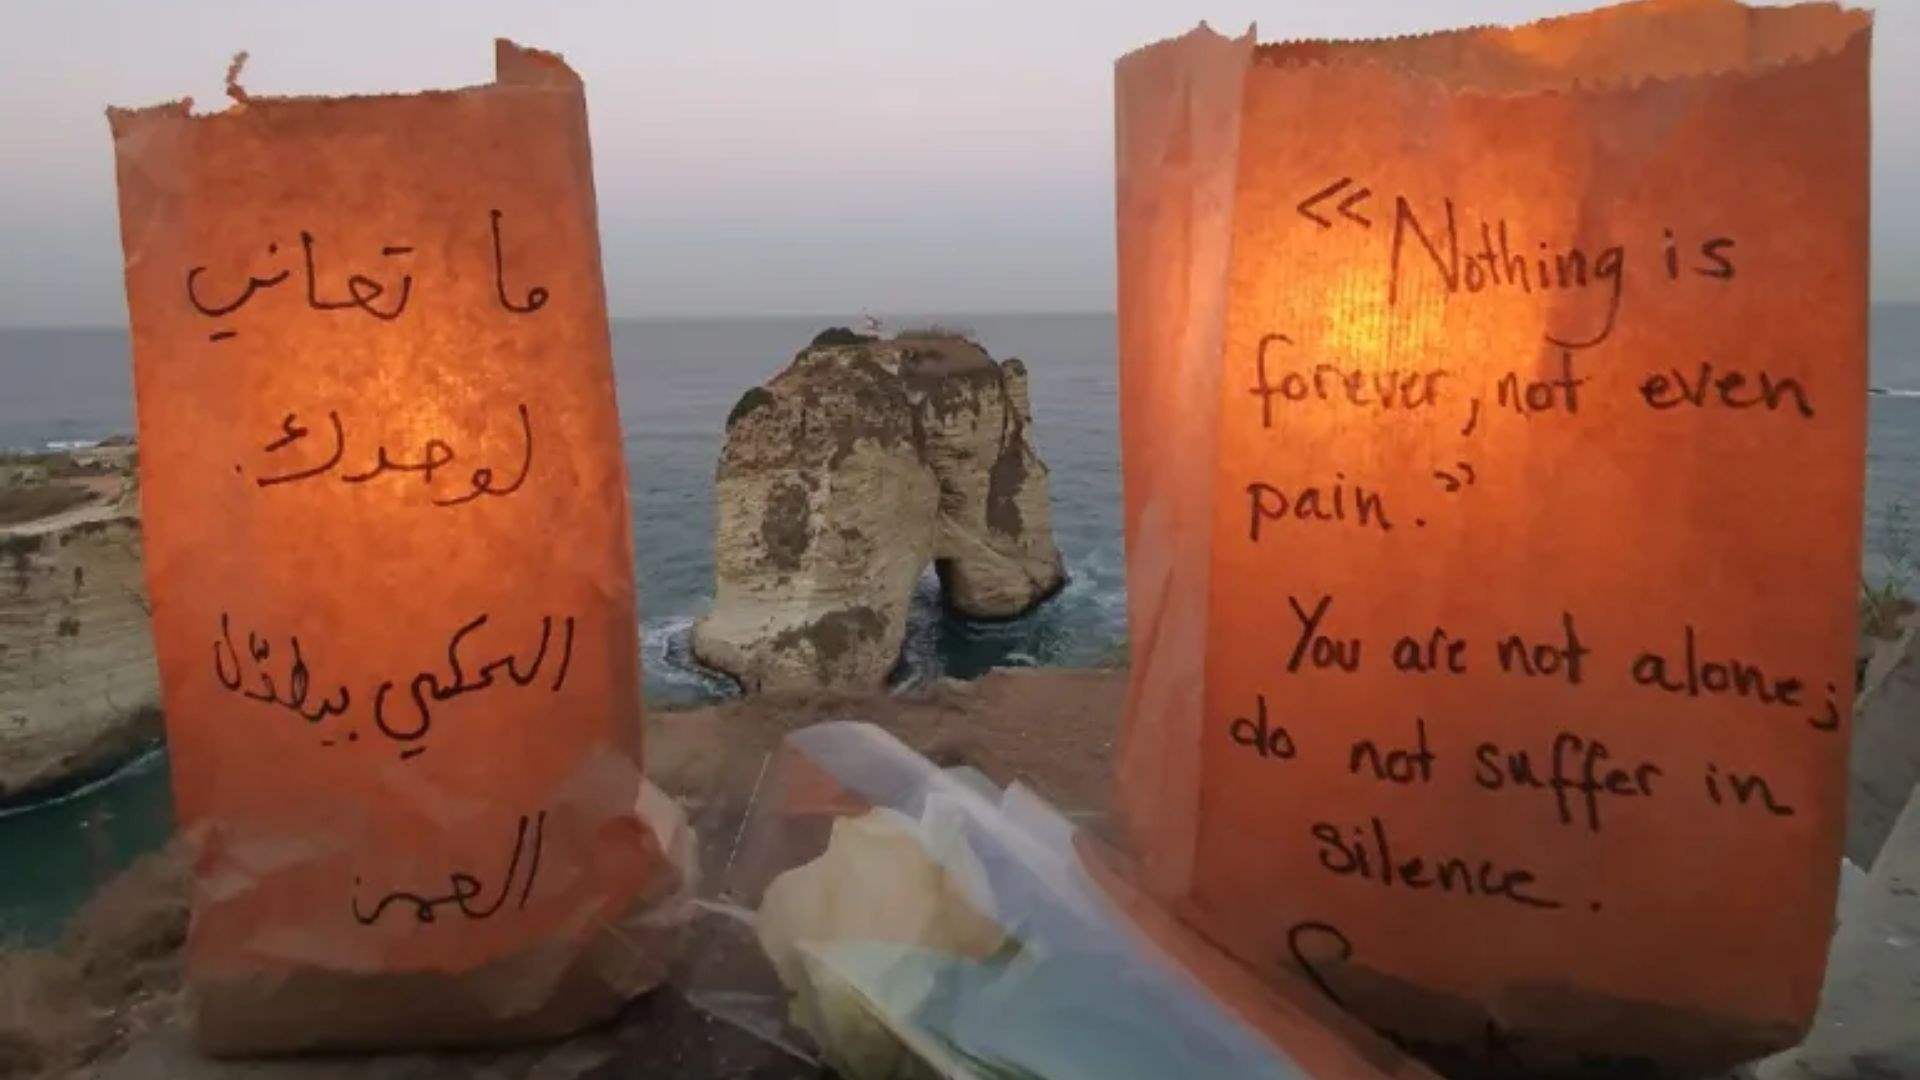 Lebanon’s Suicide rates increased 32% over nine years: report